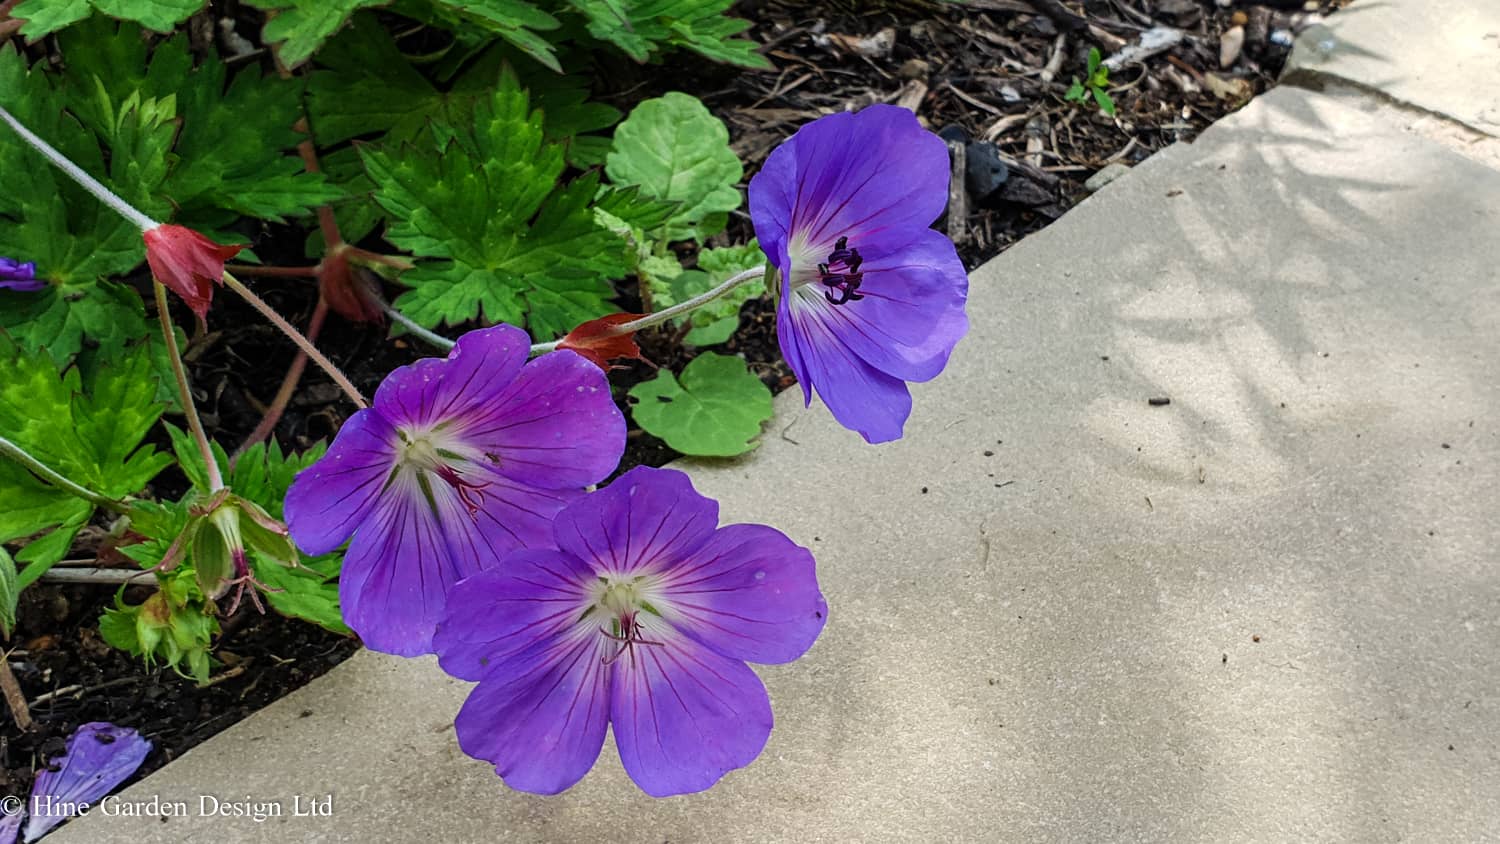 Geranium 'Rozanne' with its blue purple blooms set against natural grey sandstone paving, giving that classic cottage garden feel